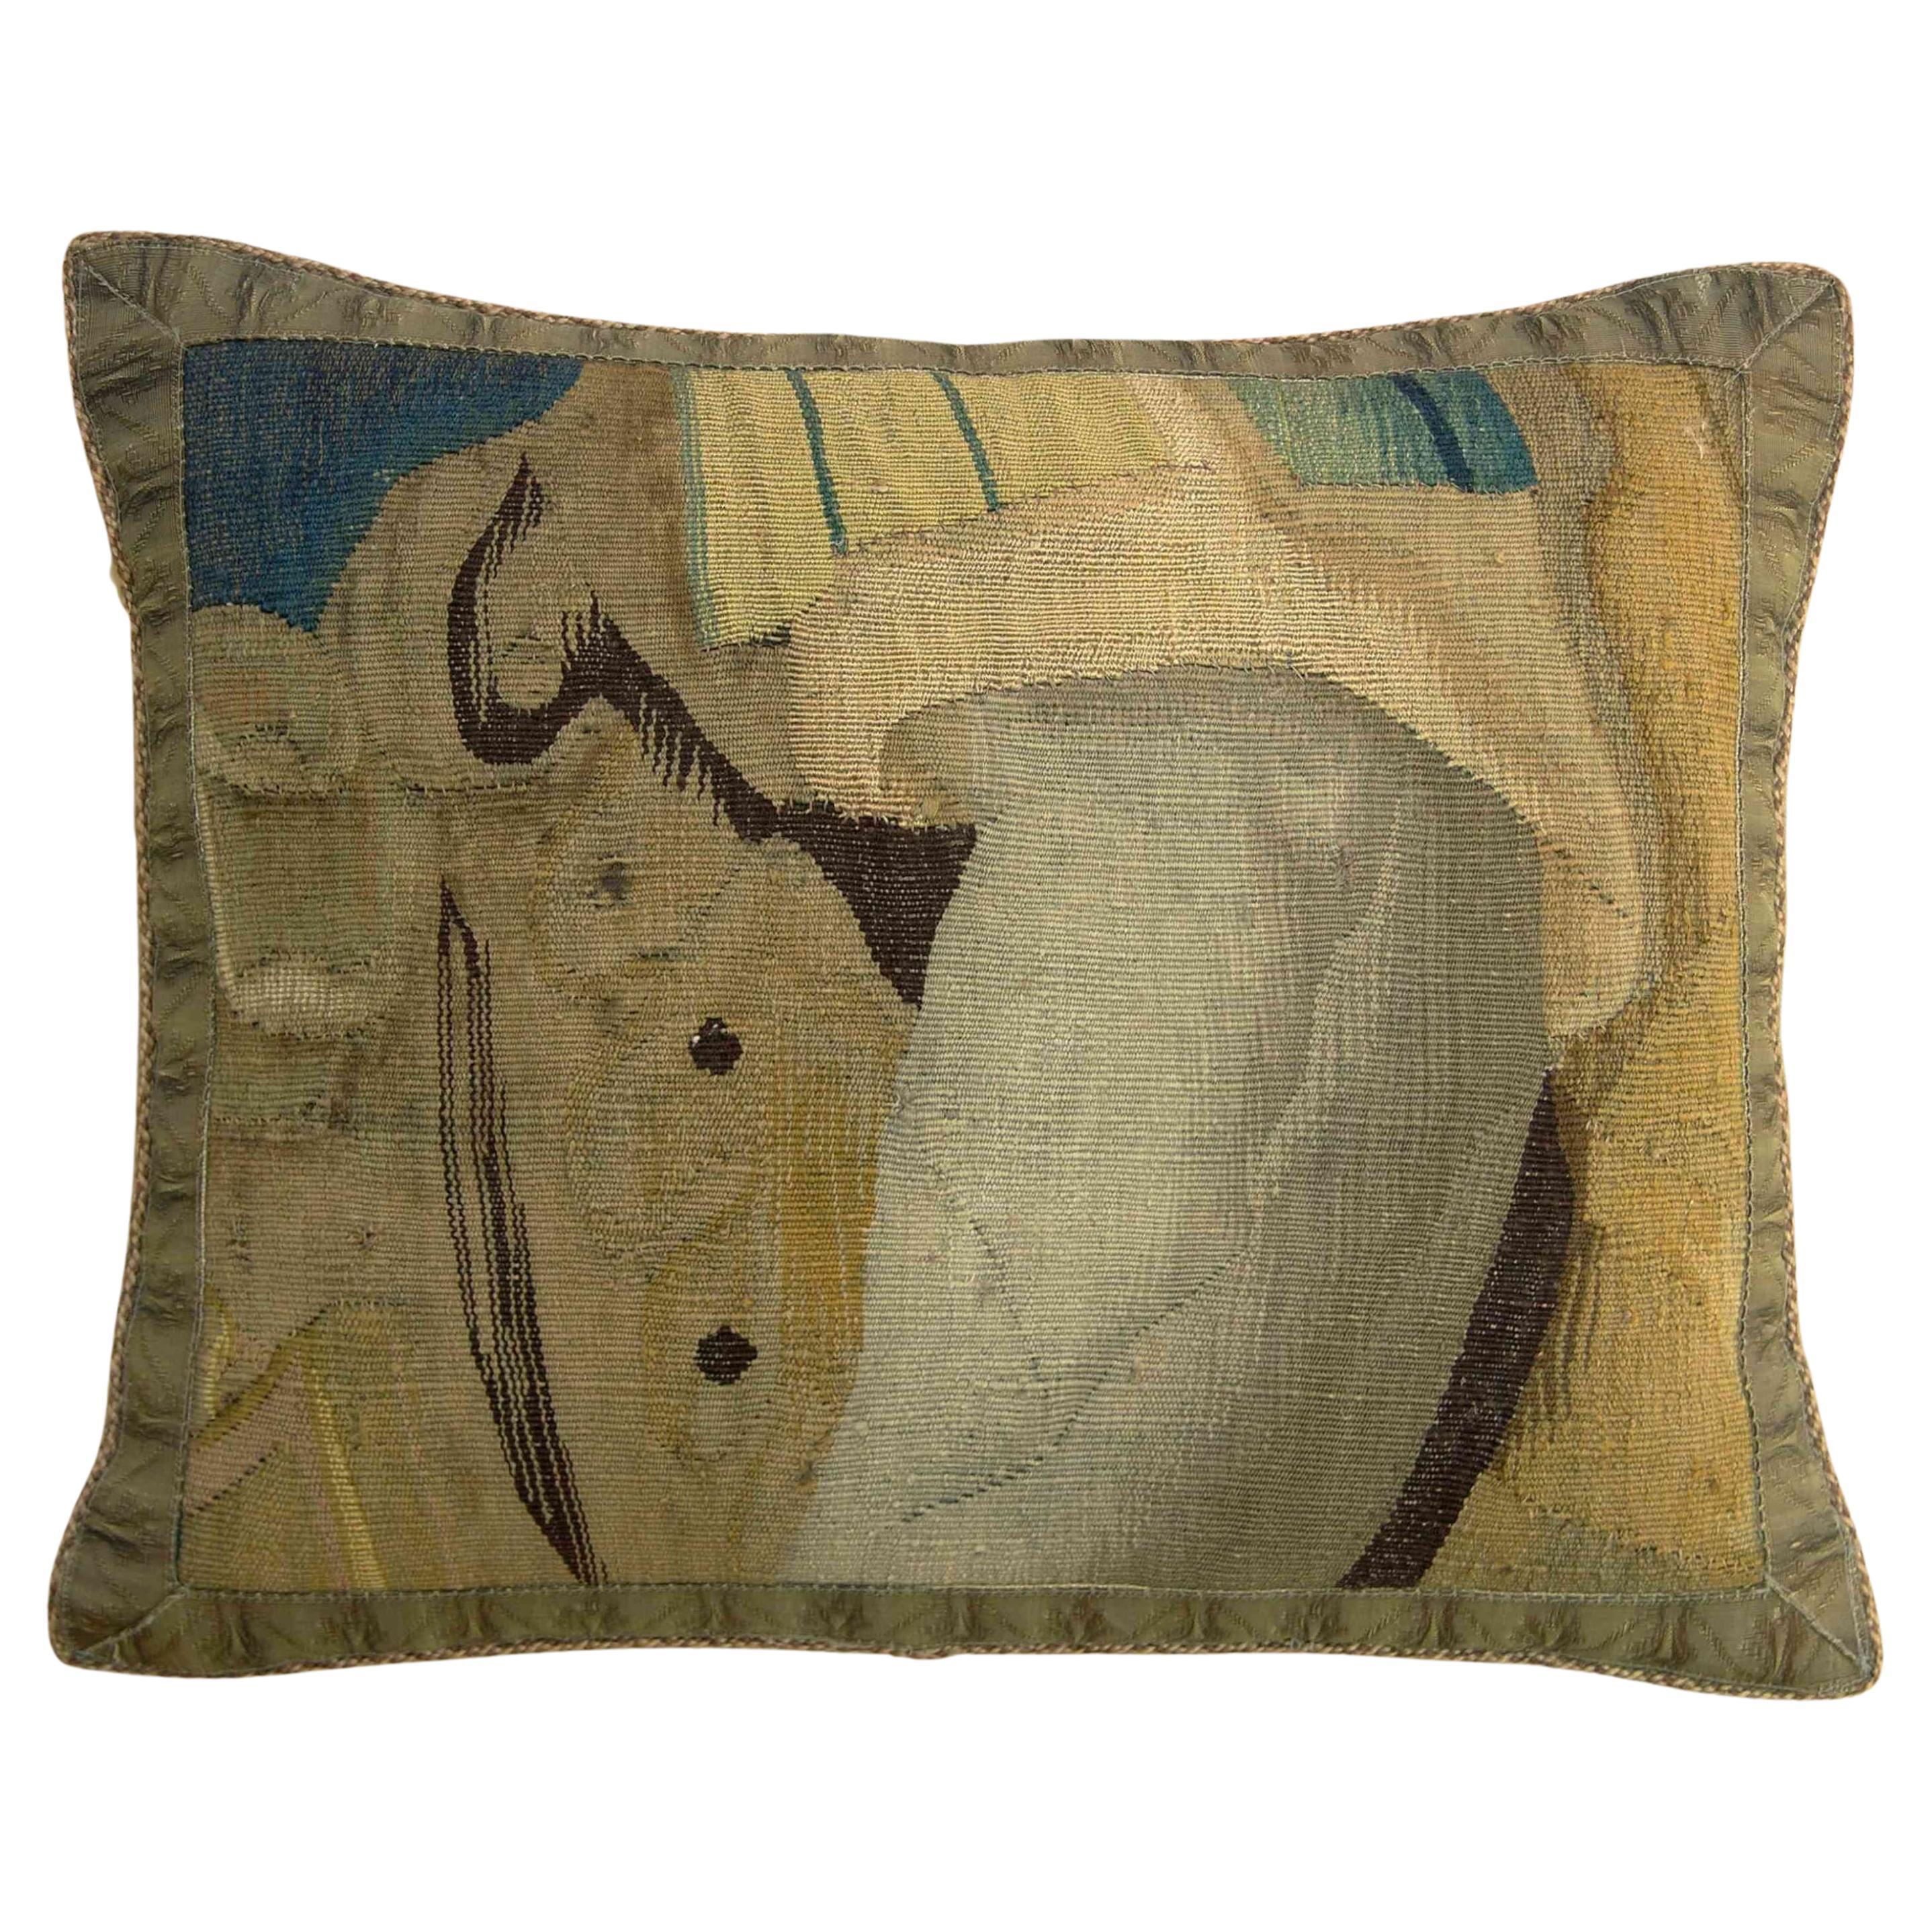 Circa 1660 Antique Flemish Tapestry Pillow For Sale